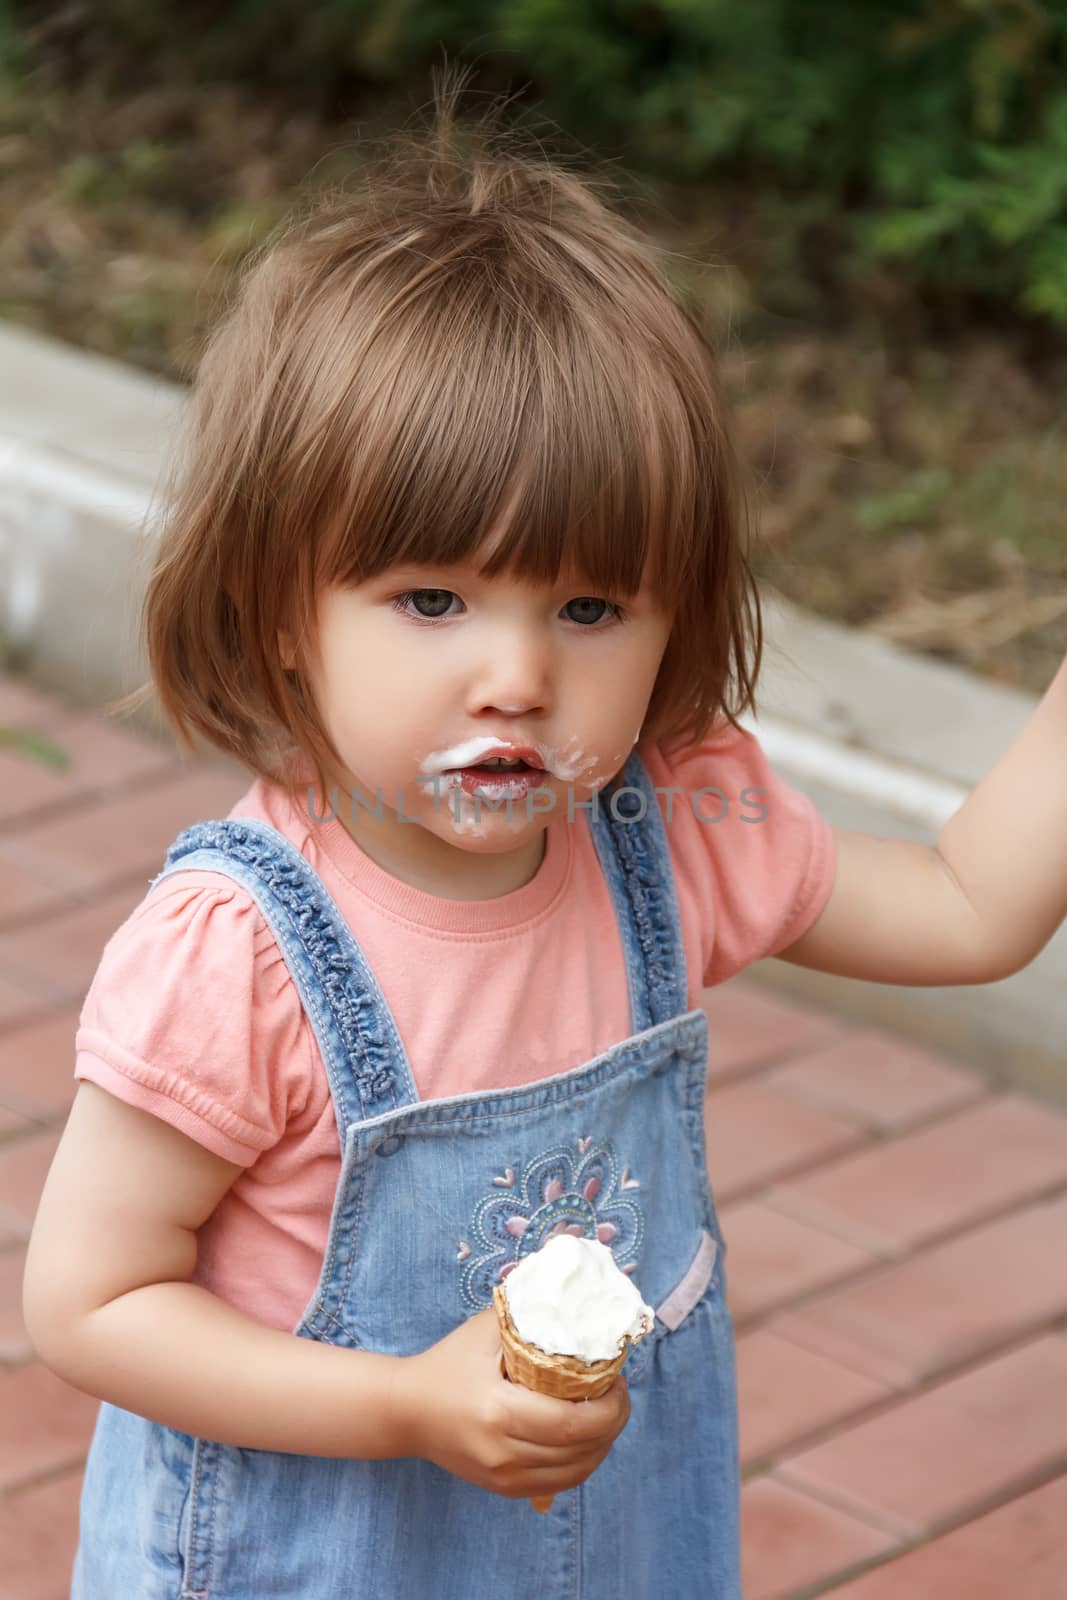 Cute girl with icecream in hand by Julialine